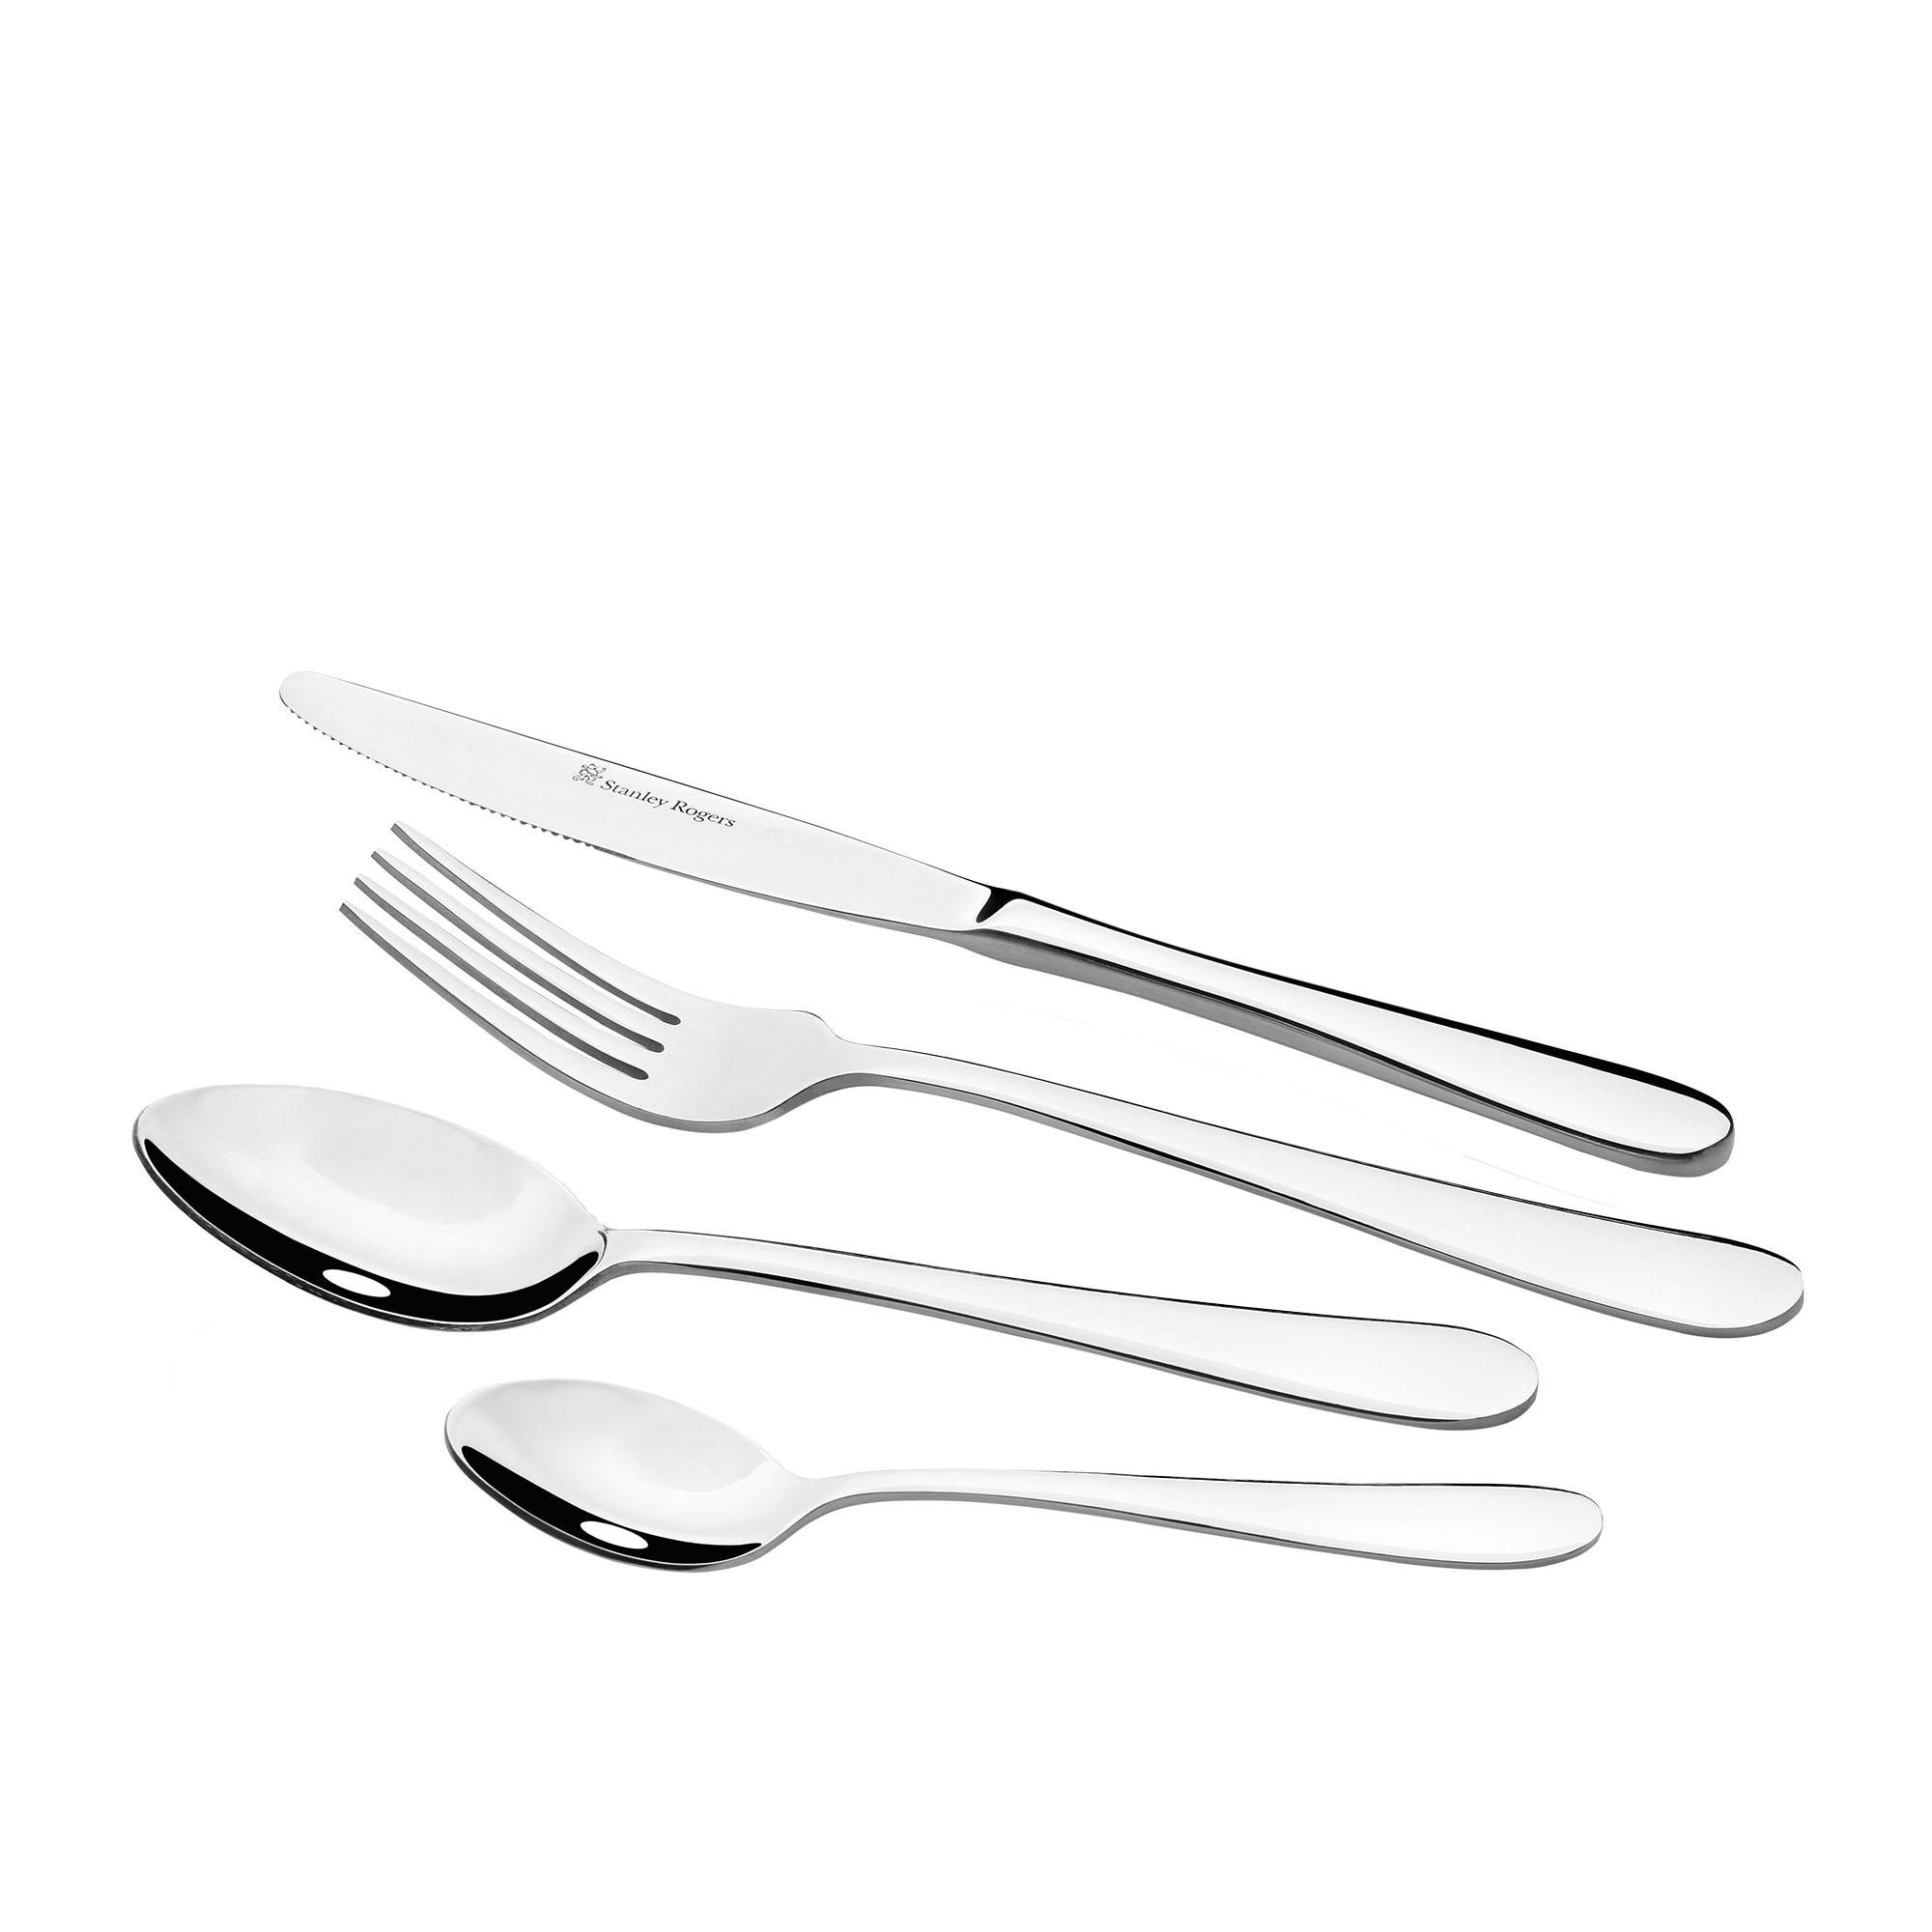 Stanley Rogers Albany Cutlery Set 16pc Stainless Steel Image 3